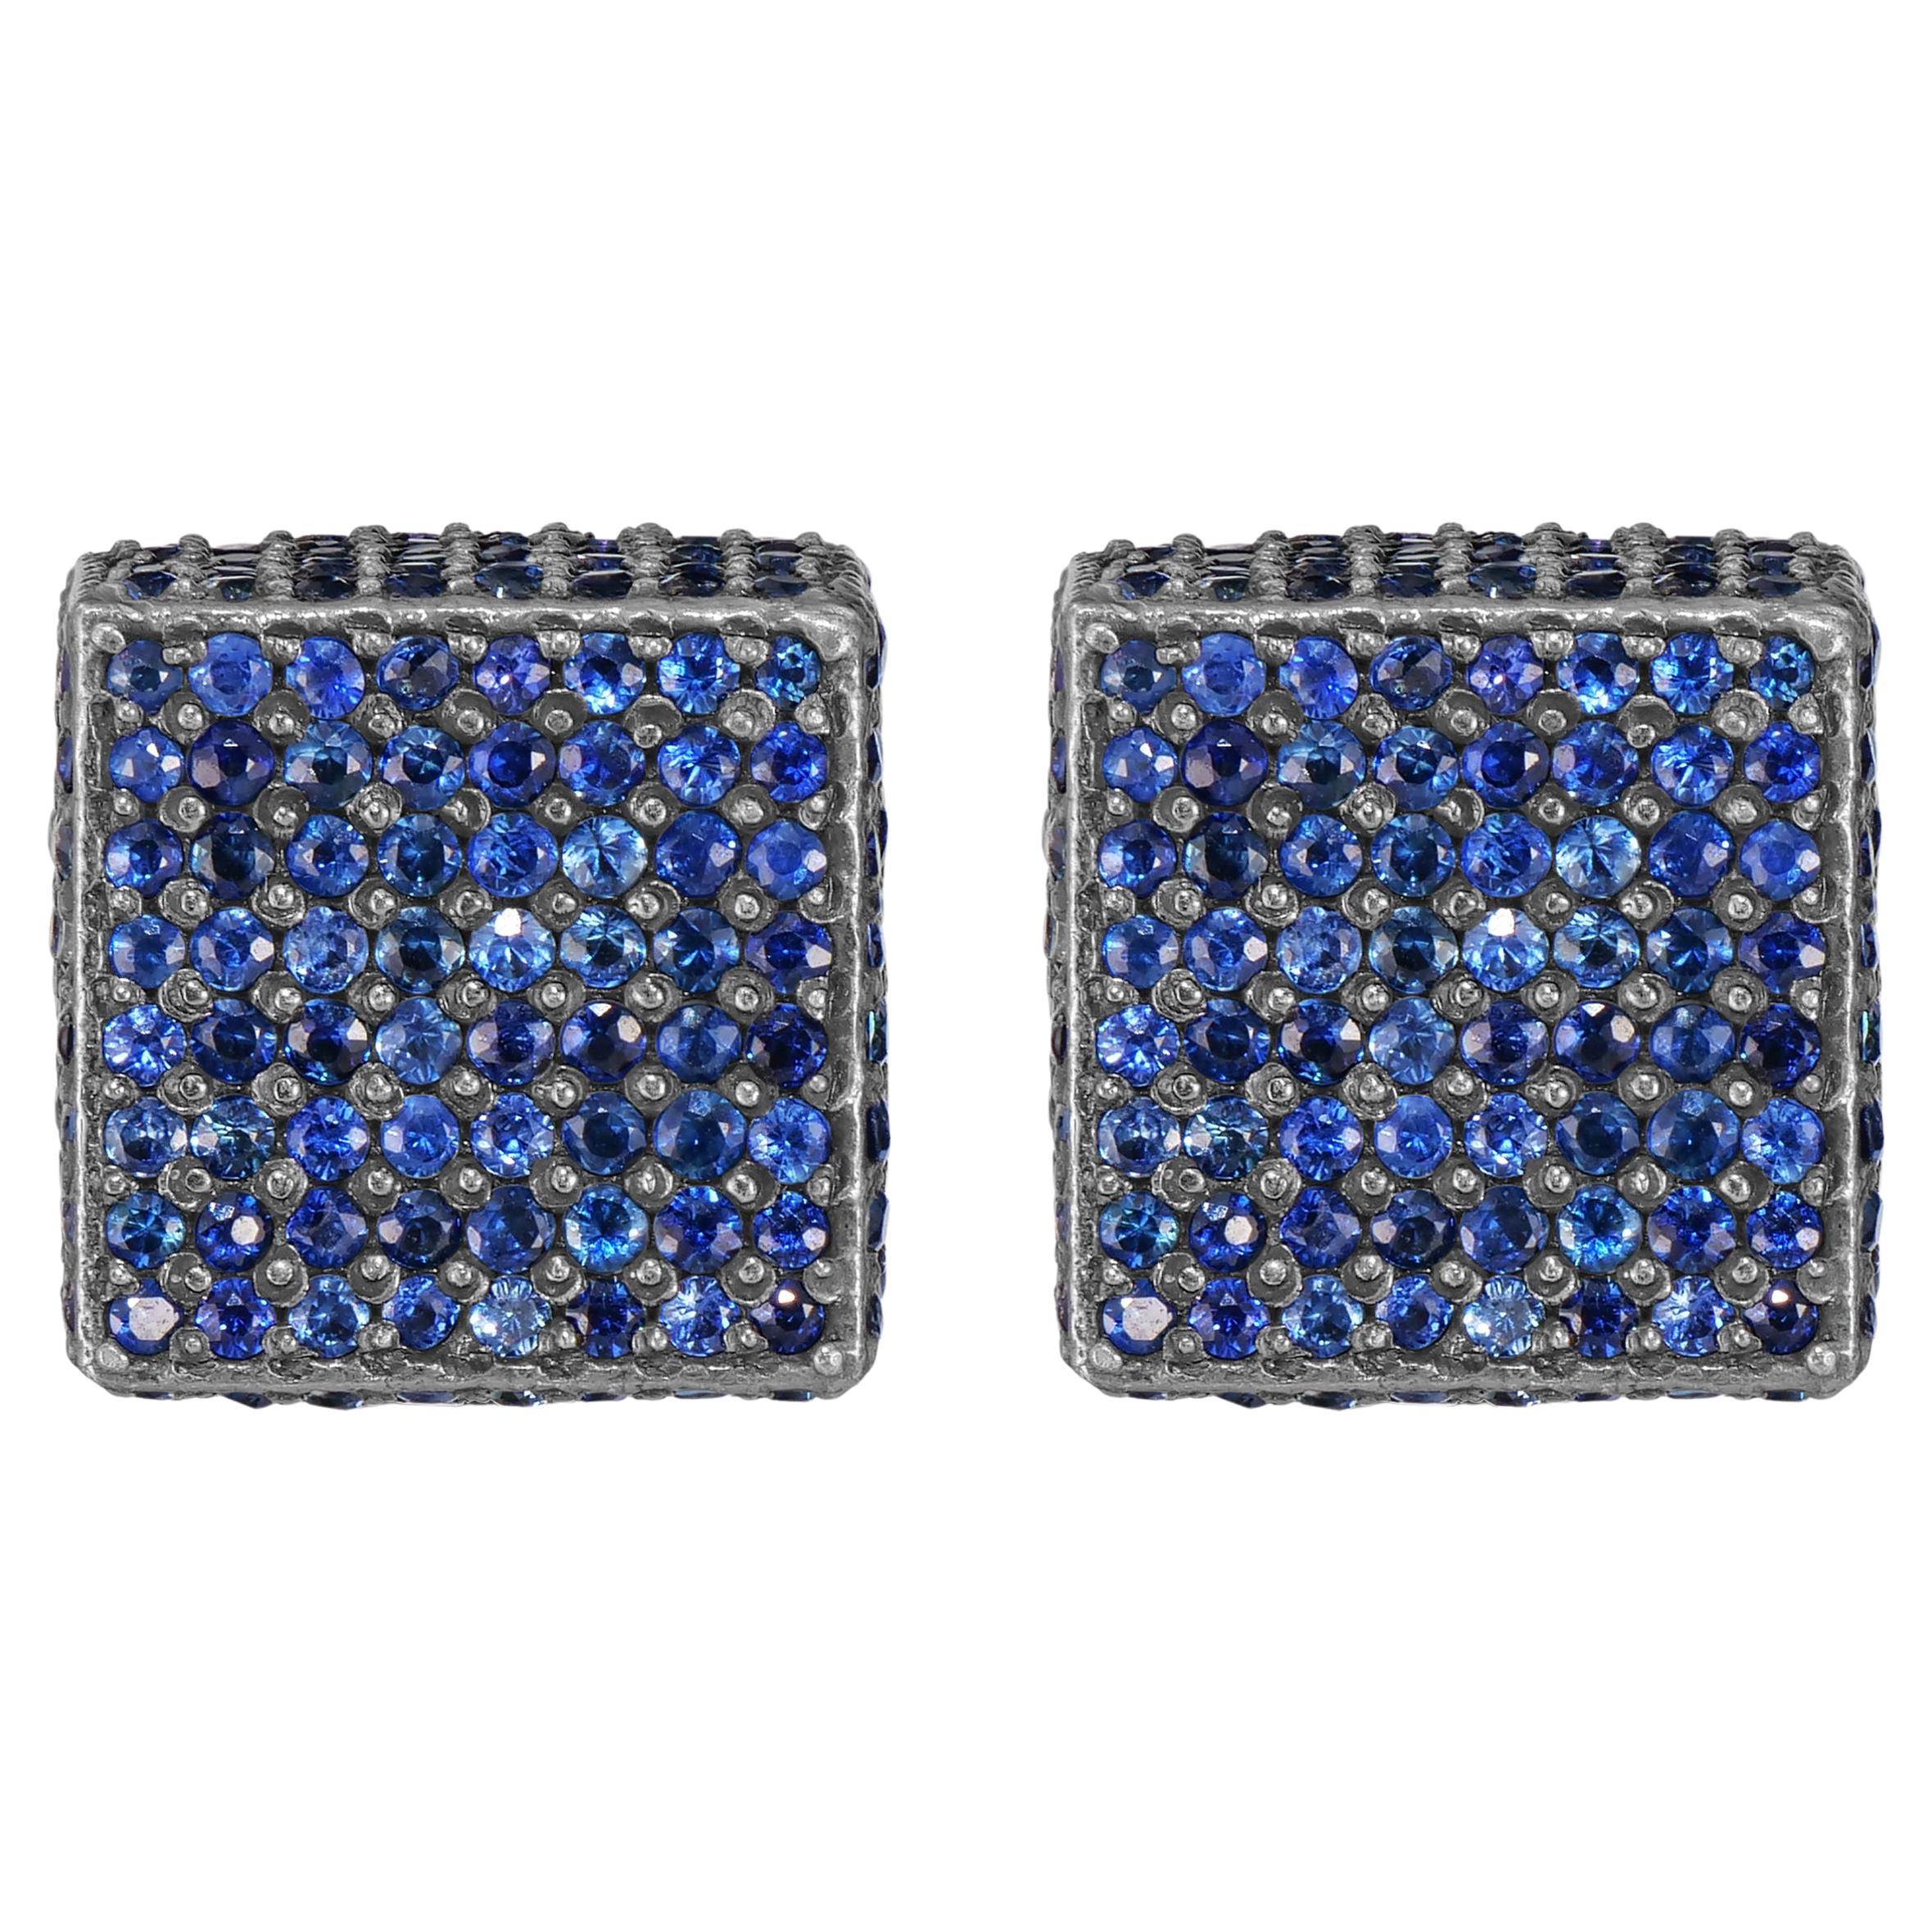 Behold the Victorian 11.8 Cttw. Blue Sapphire and Diamond Double Dice Stud Earrings—a playful and sophisticated addition to your jewelry collection.

Each earring is a miniature work of art, featuring two cubical dices meticulously crafted to